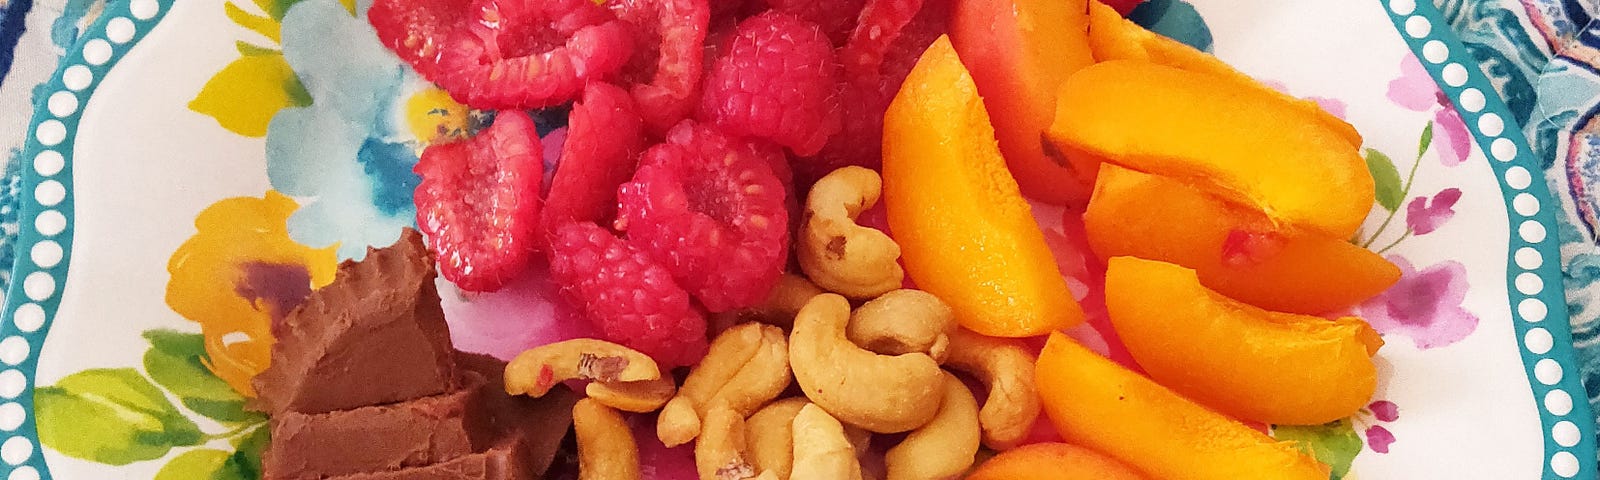 Nectarines, raspberries, cashews and keto fat bomb for my lunch! Image © Milli Thornton